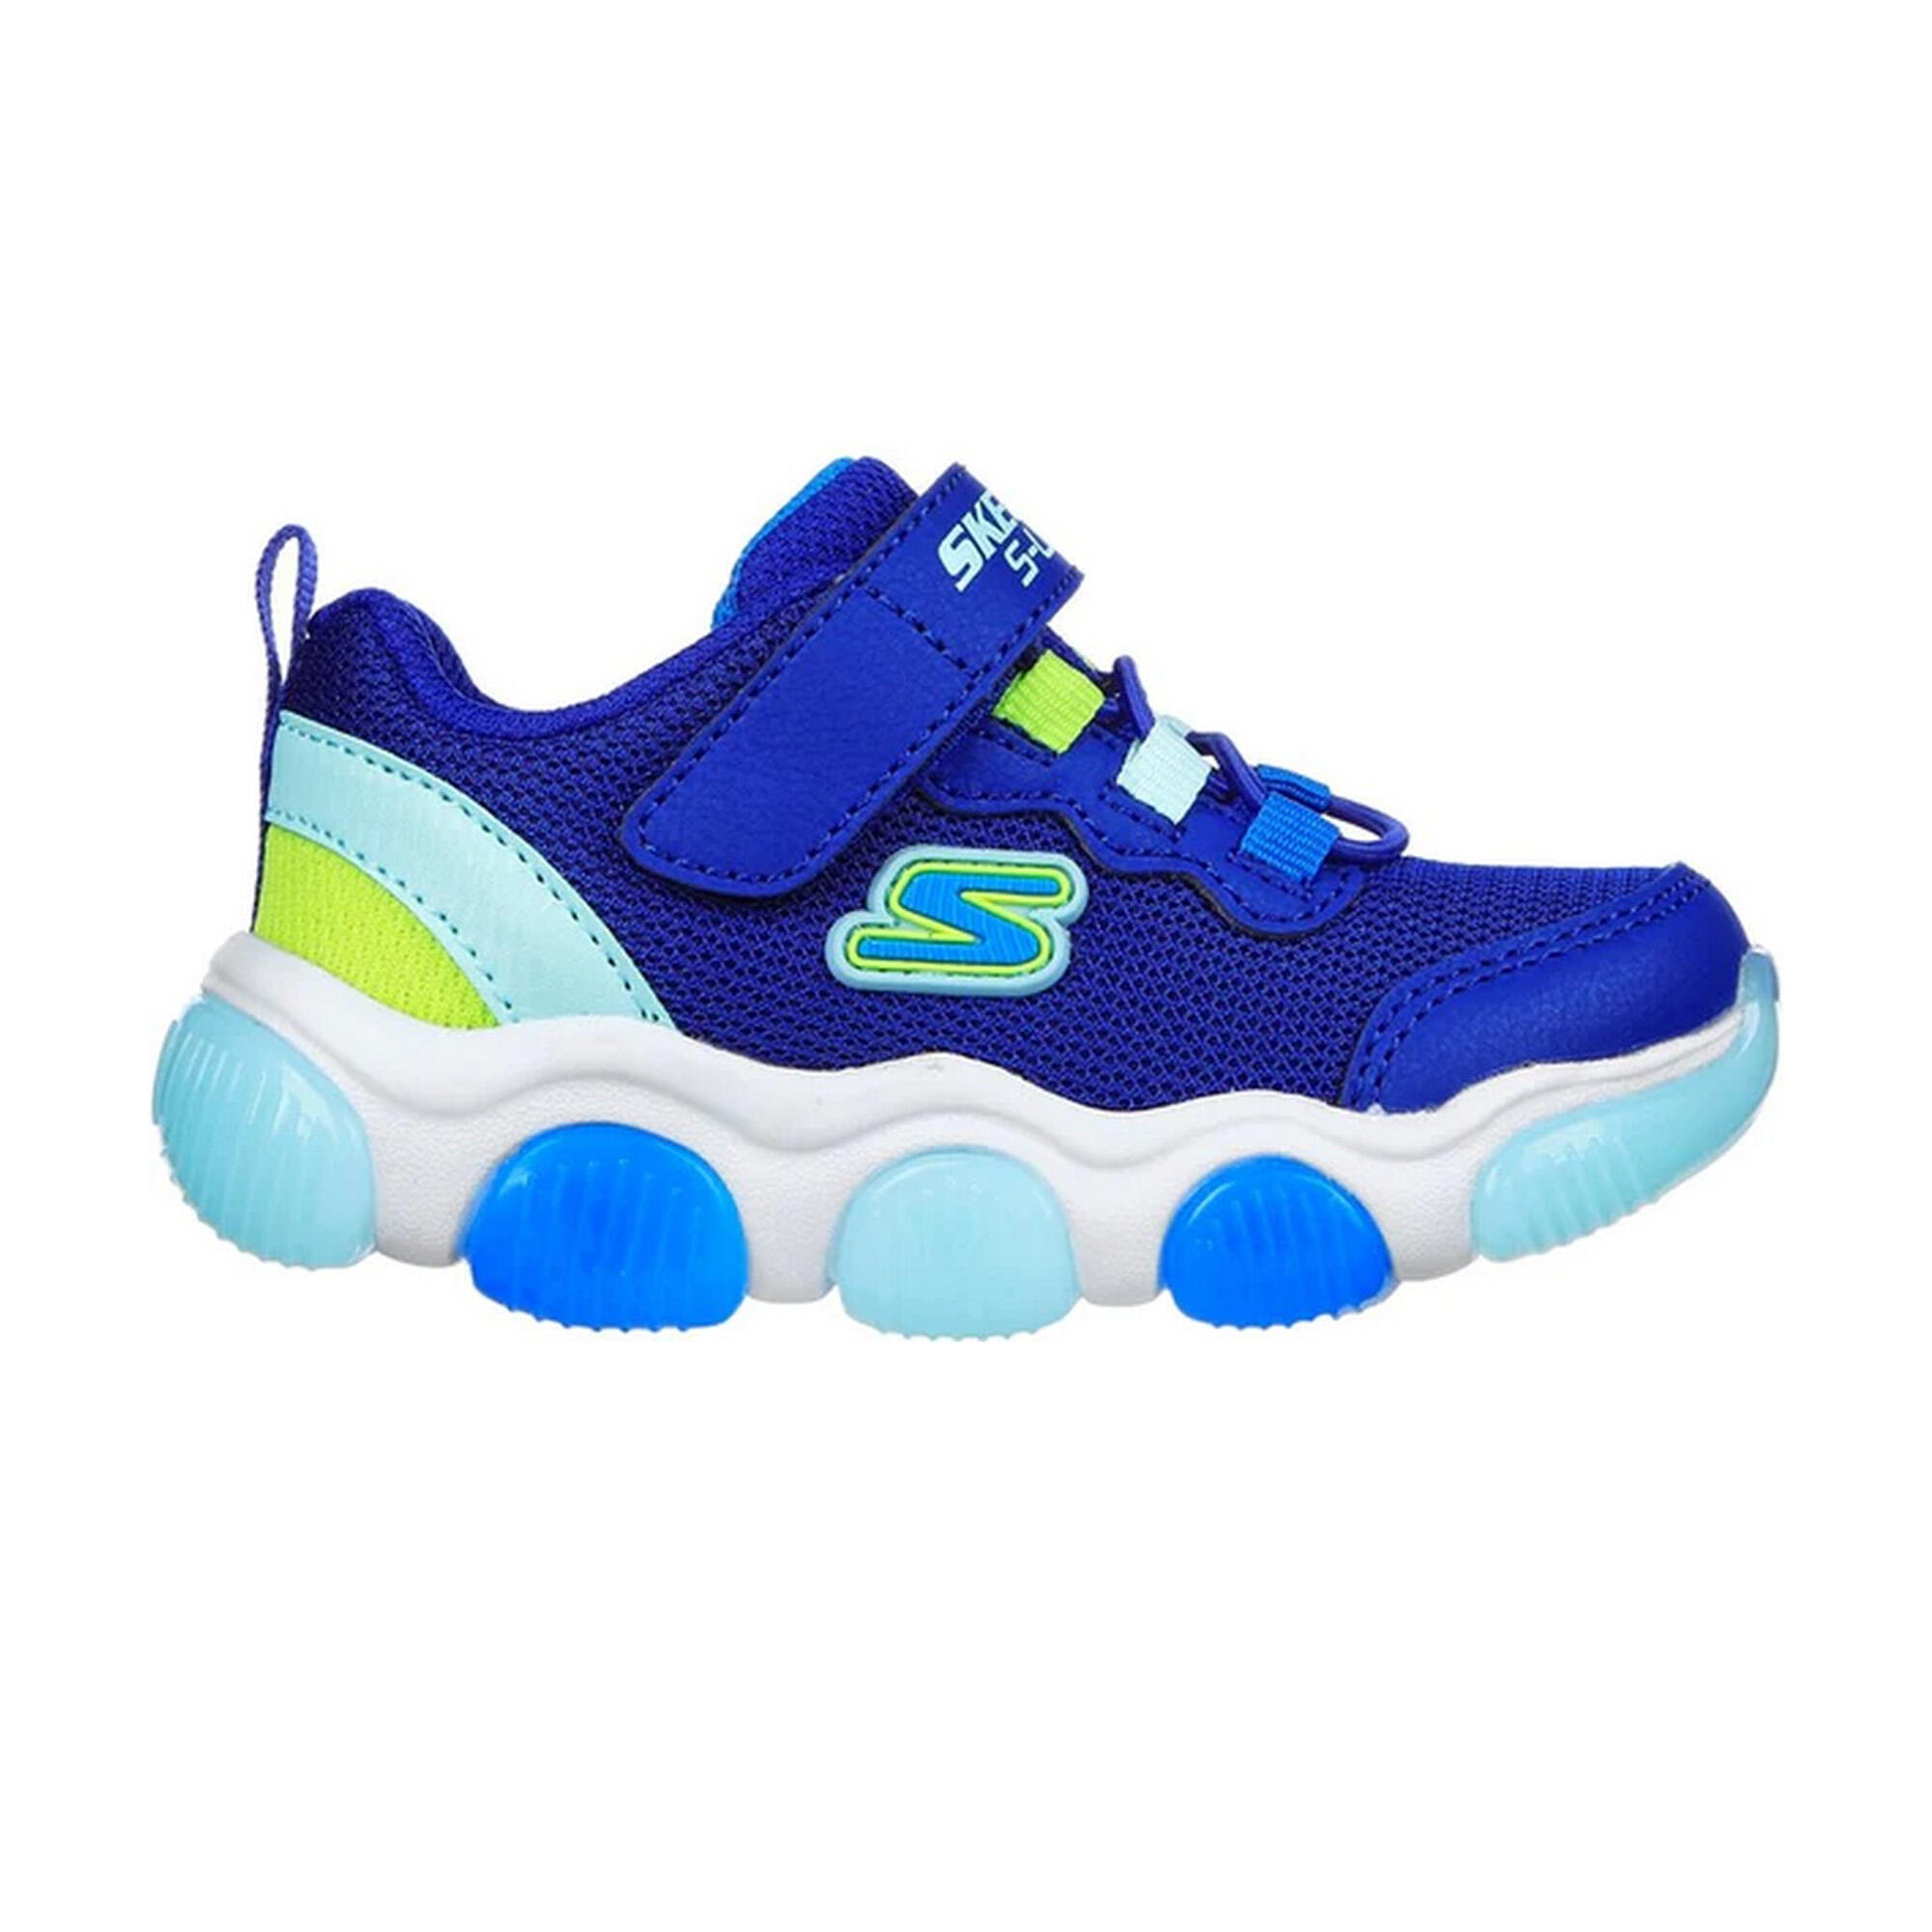 Boys S Lights Mighty Glow Trainers (Blue/Lime) 3/5